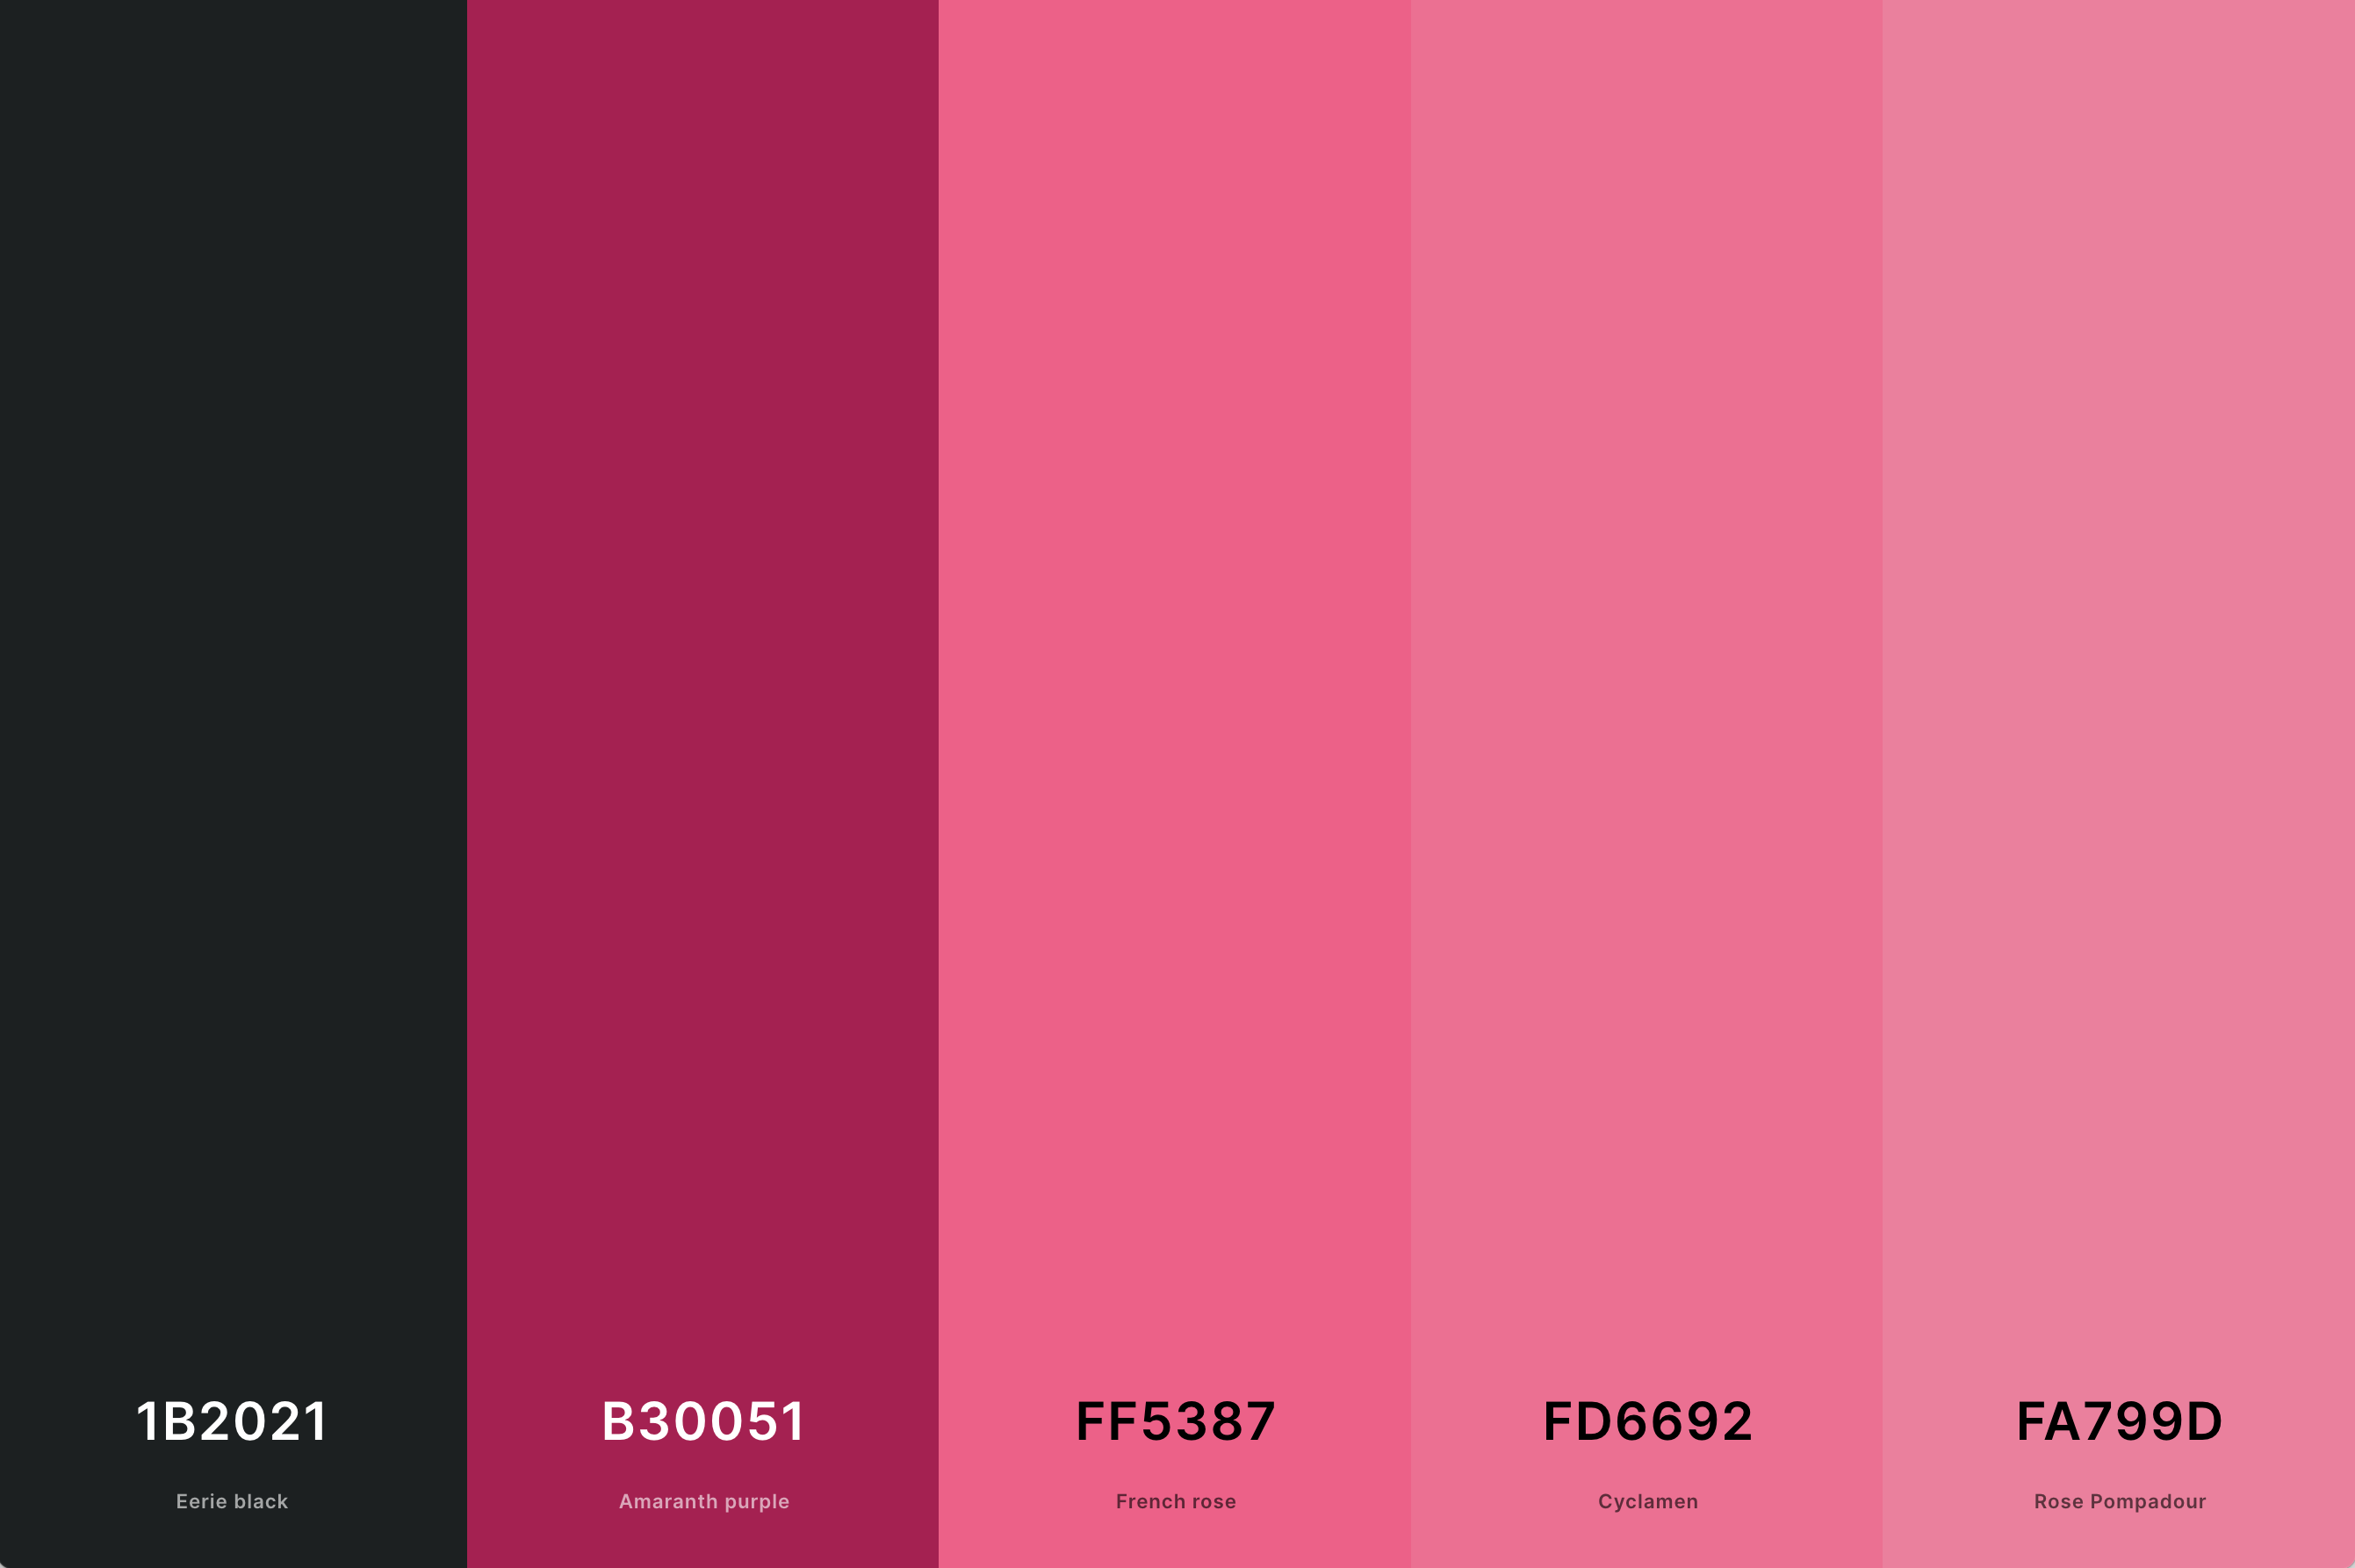 15. Pink And Black Color Palette Color Palette with Eerie Black (Hex #1B2021) + Amaranth Purple (Hex #B30051) + French Rose (Hex #FF5387) + Cyclamen (Hex #FD6692) + Rose Pompadour (Hex #FA799D) Color Palette with Hex Codes